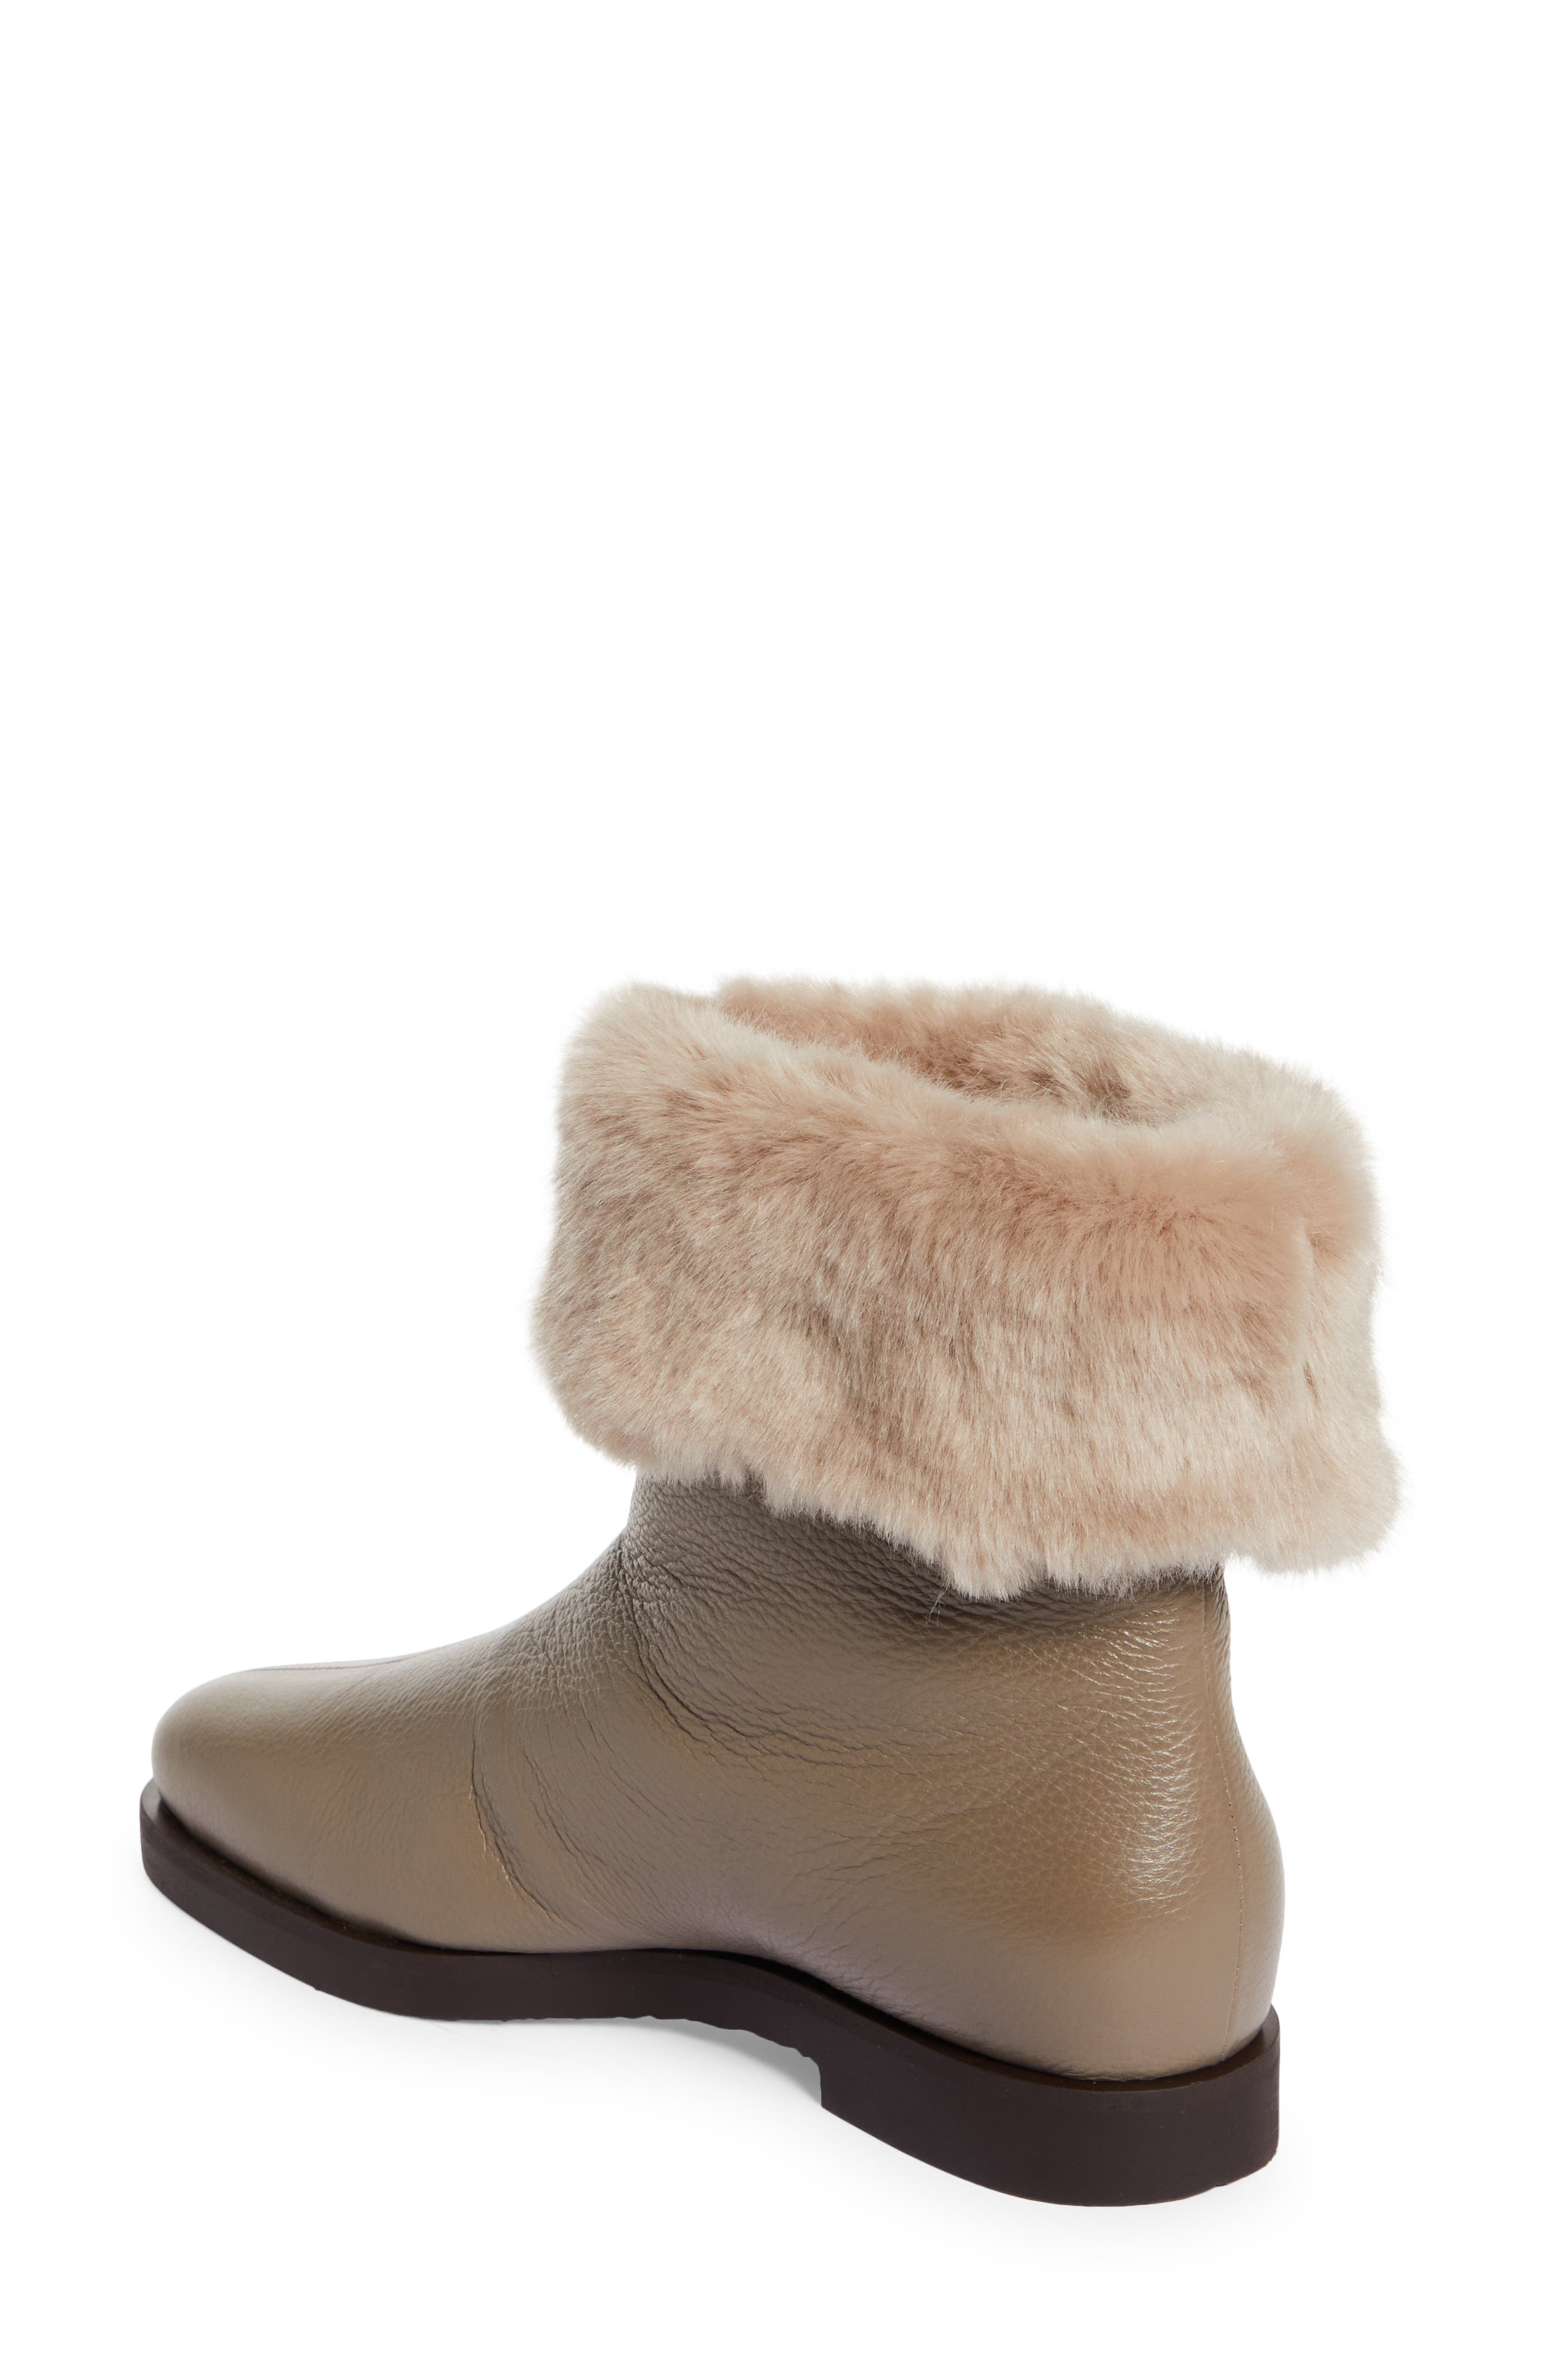 The Off-Duty faux fur-lined leather boots in brown - Toteme